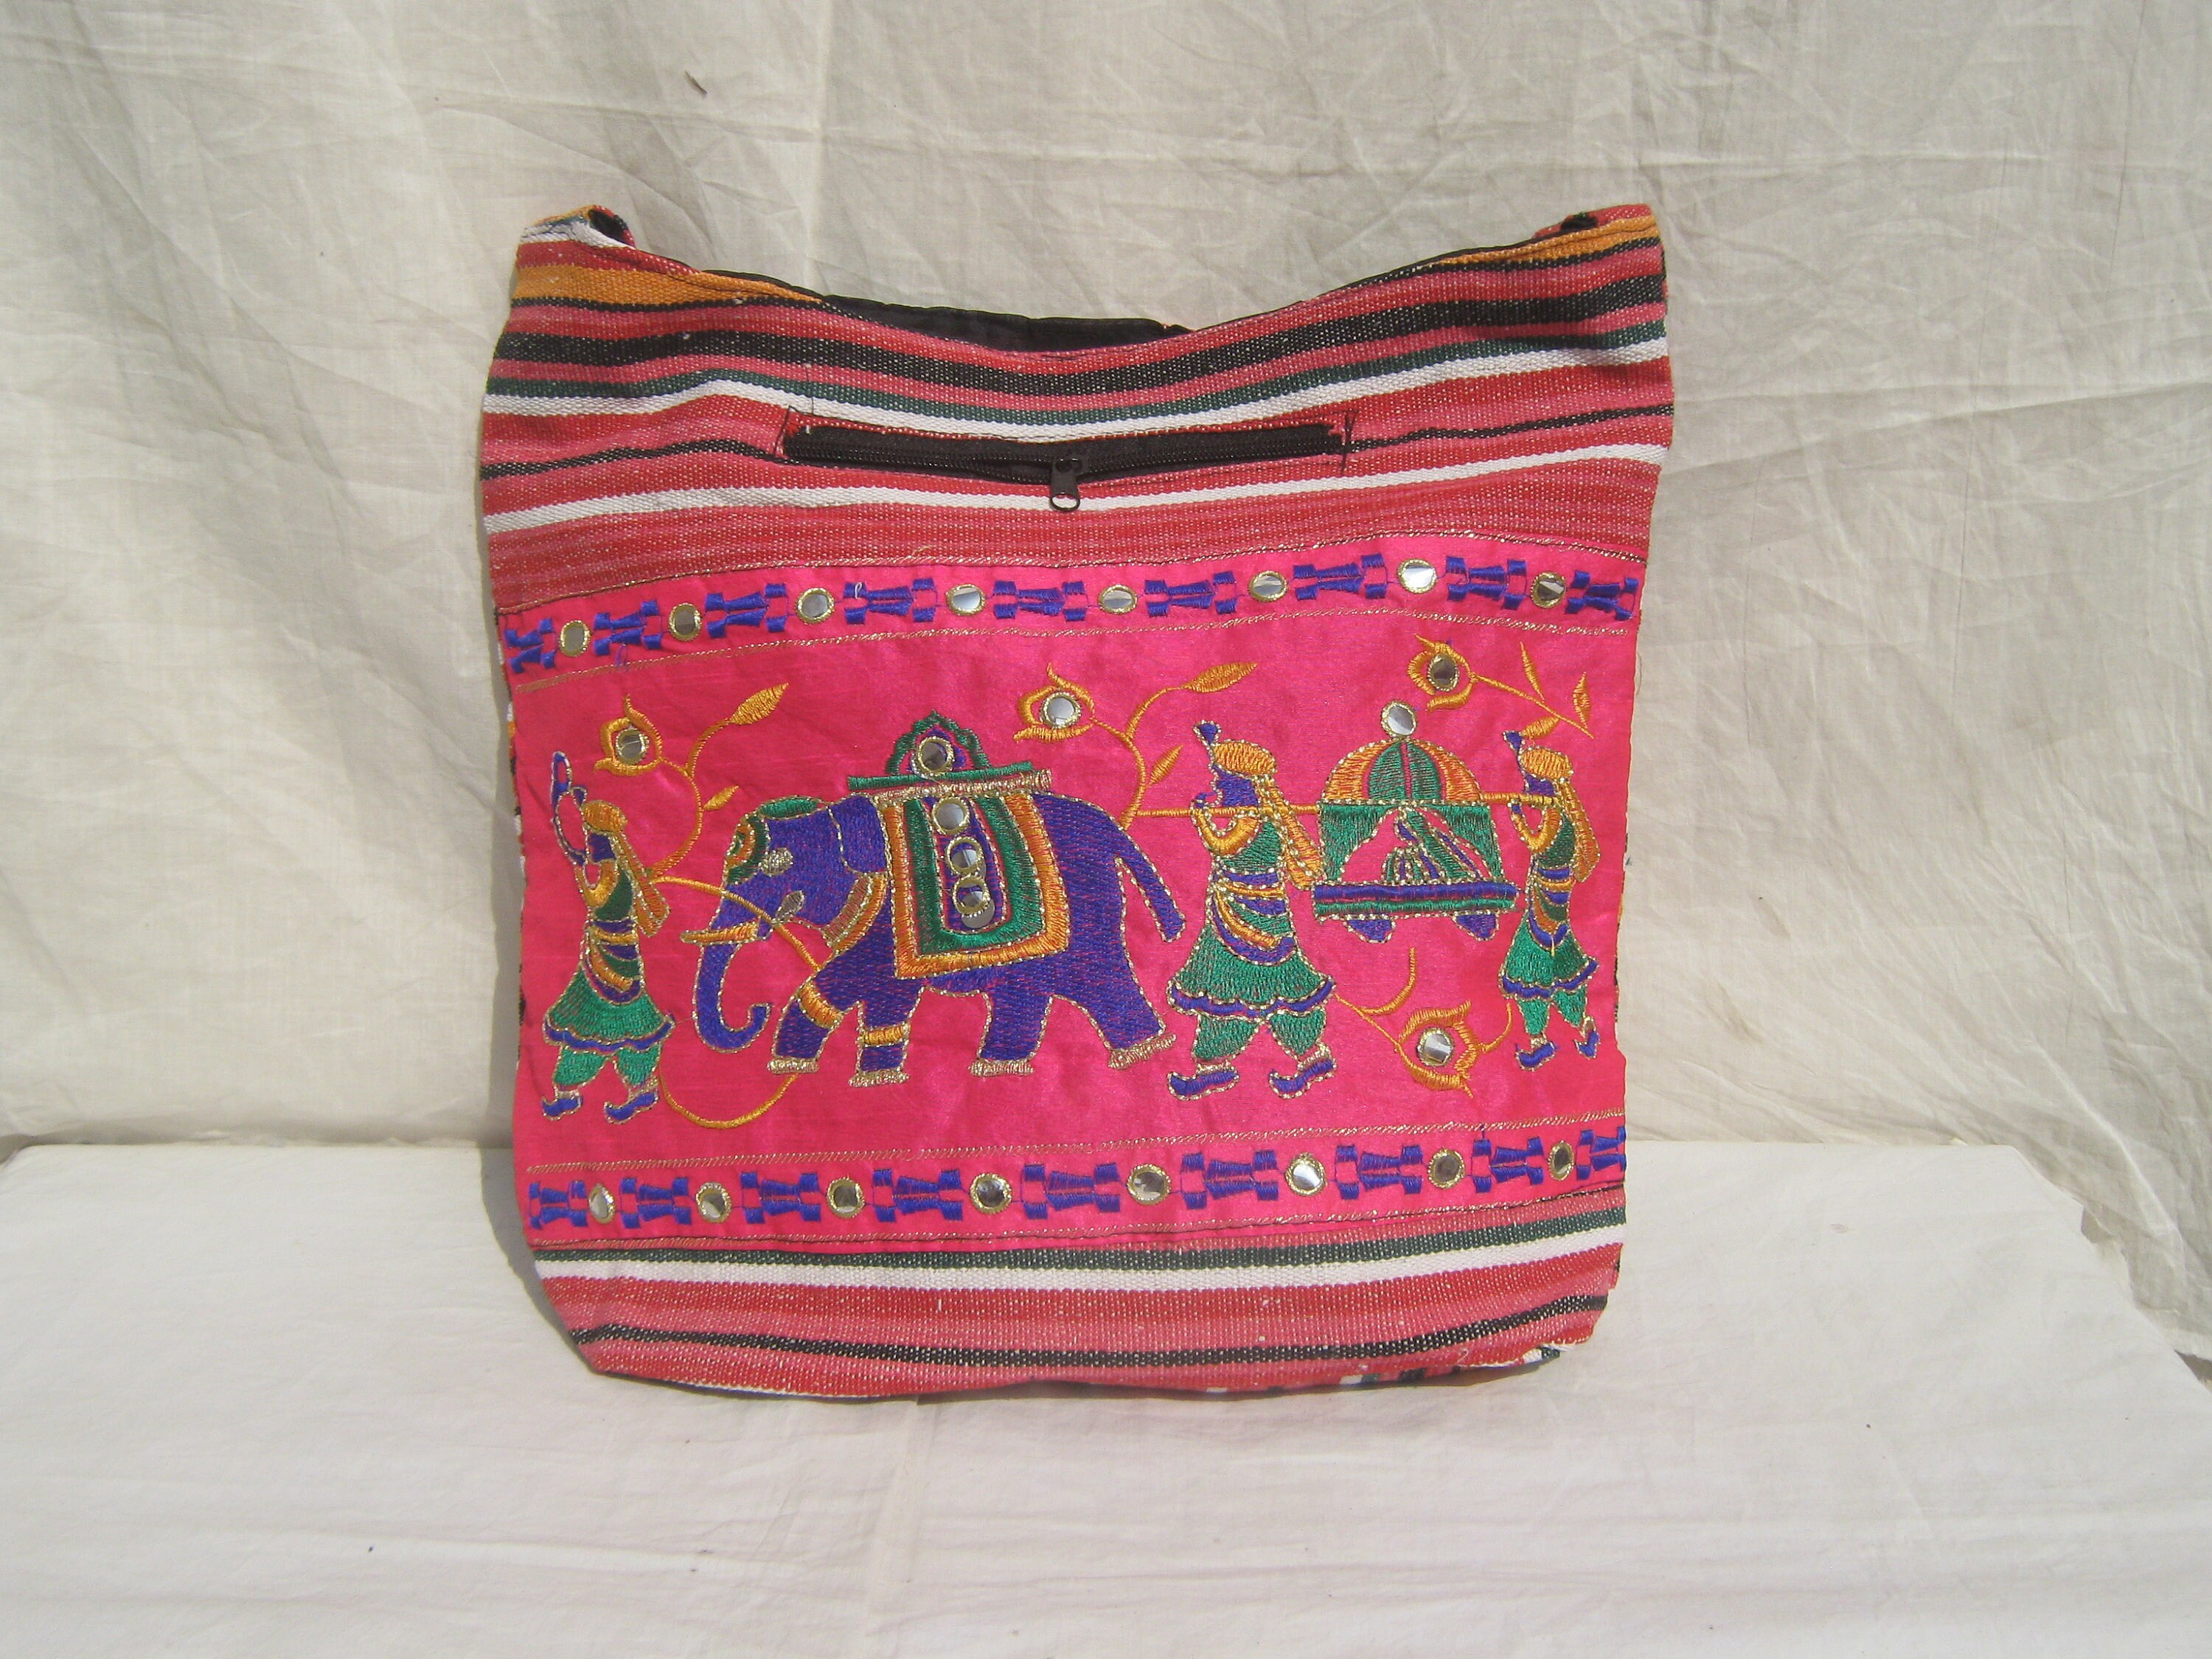 Craft Trade Clutch Bags for Women Rajasthani Hand Embroidered Jaipuri Art  Indian Sling Bag Cream Cluches Hand Bag for Wedding Party Gifts: Handbags:  Amazon.com